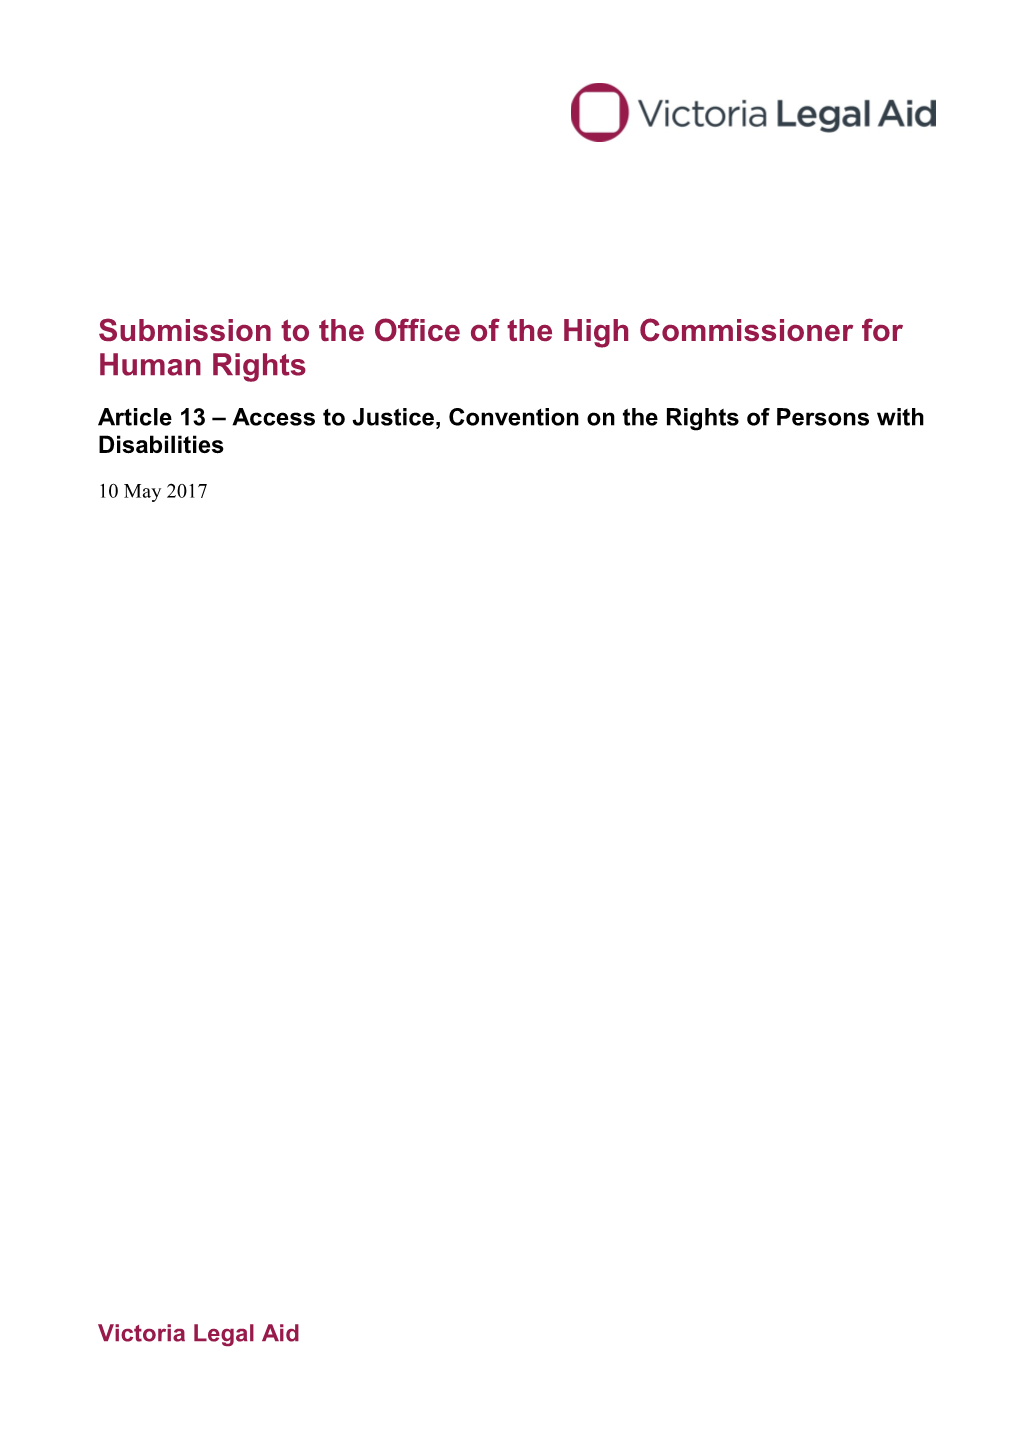 Submission to the Office of the High Commissioner for Human Rights